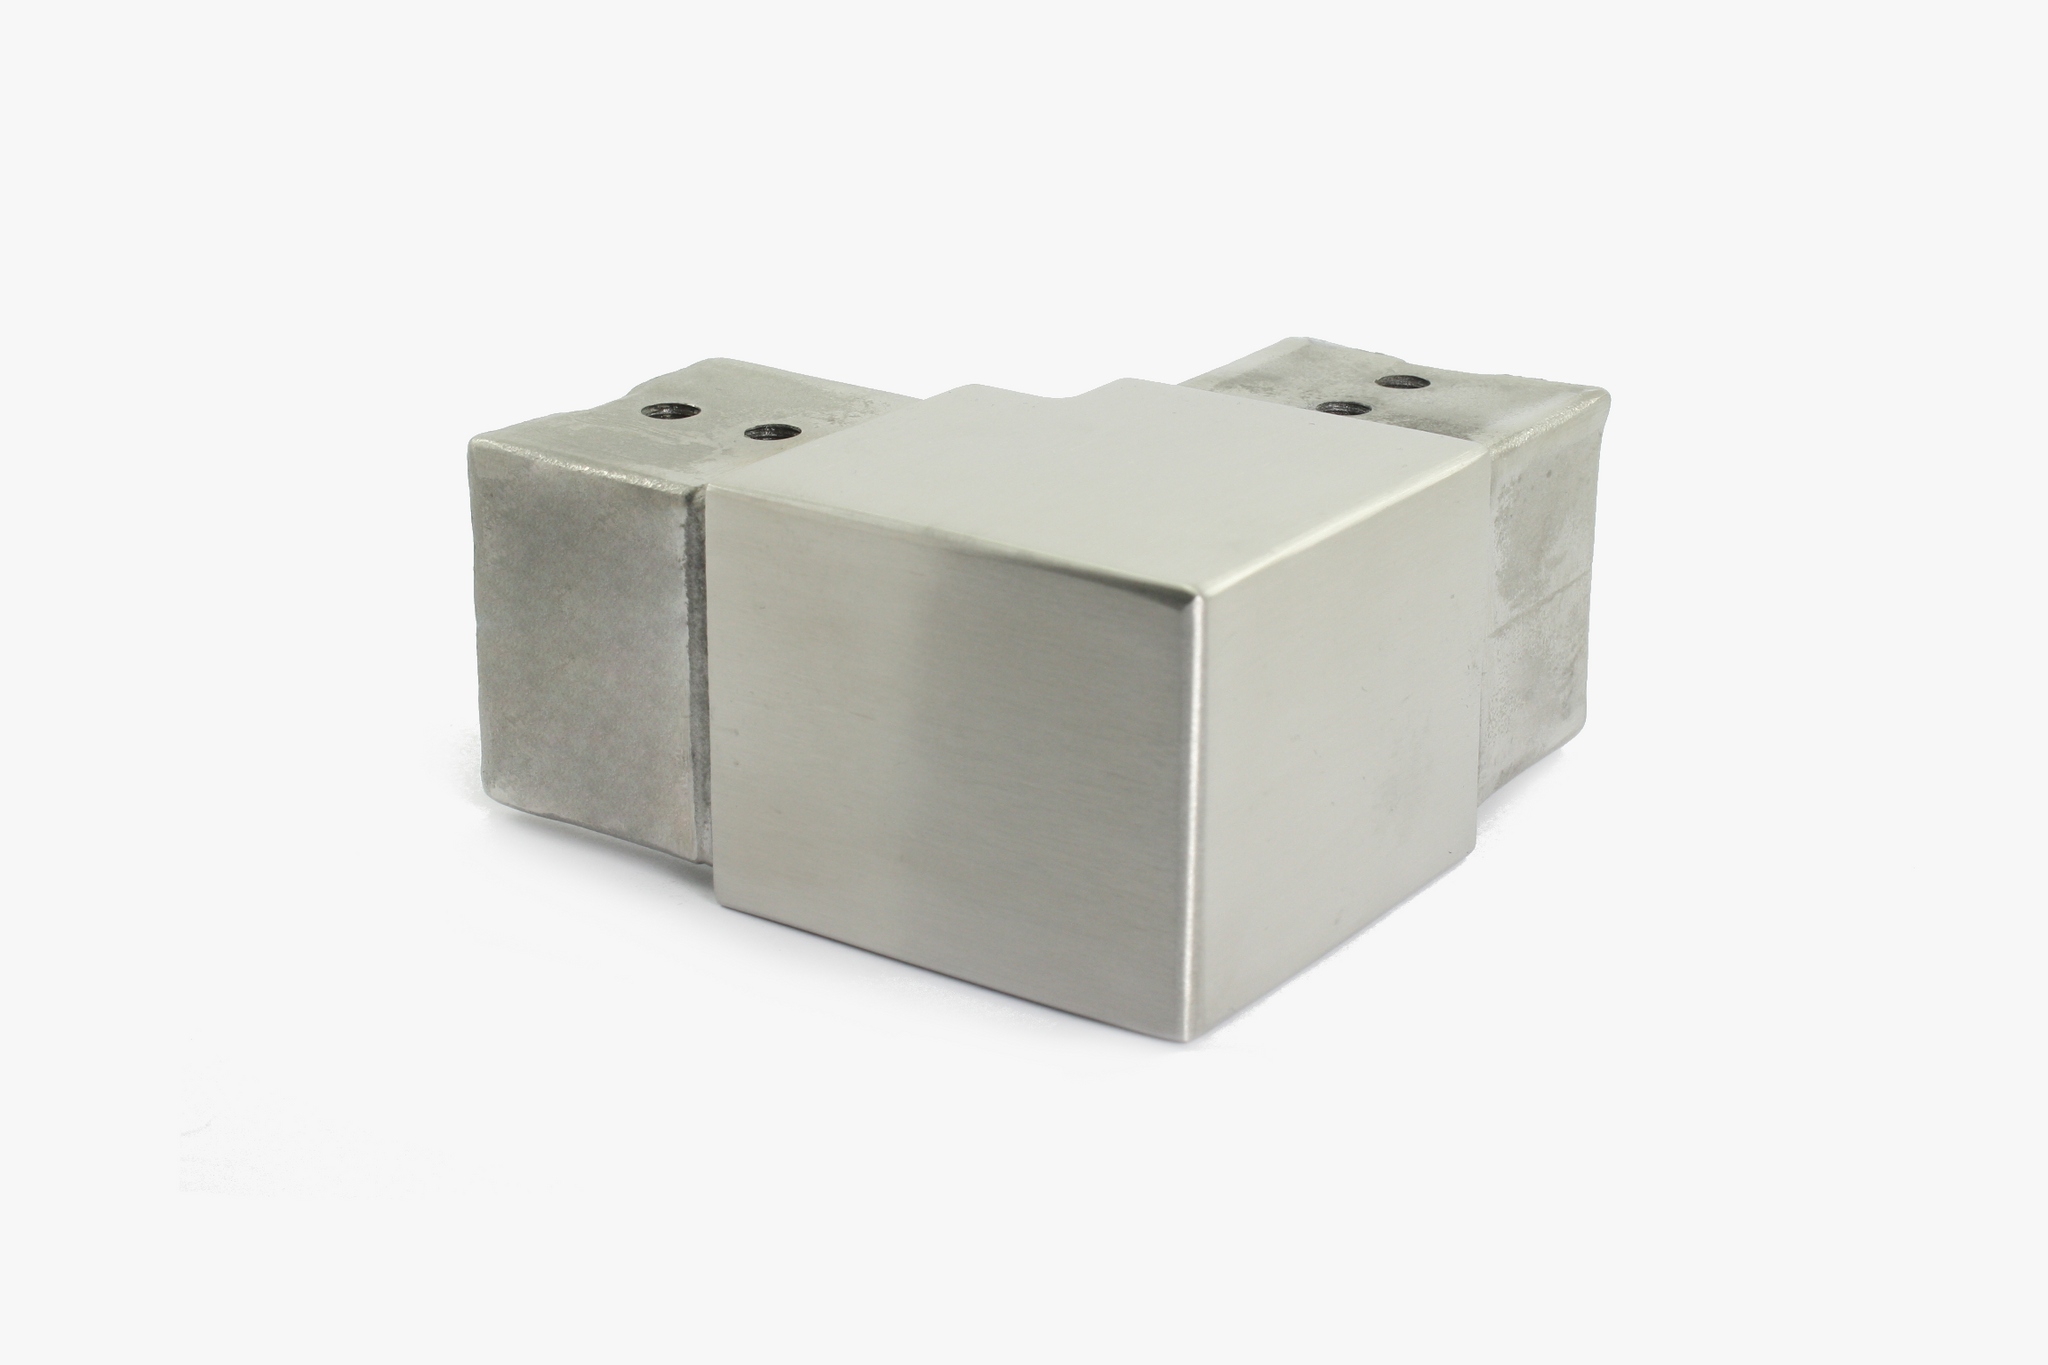 90 degree horizontal elbow for square slot tube - Brushed Stainless Steel